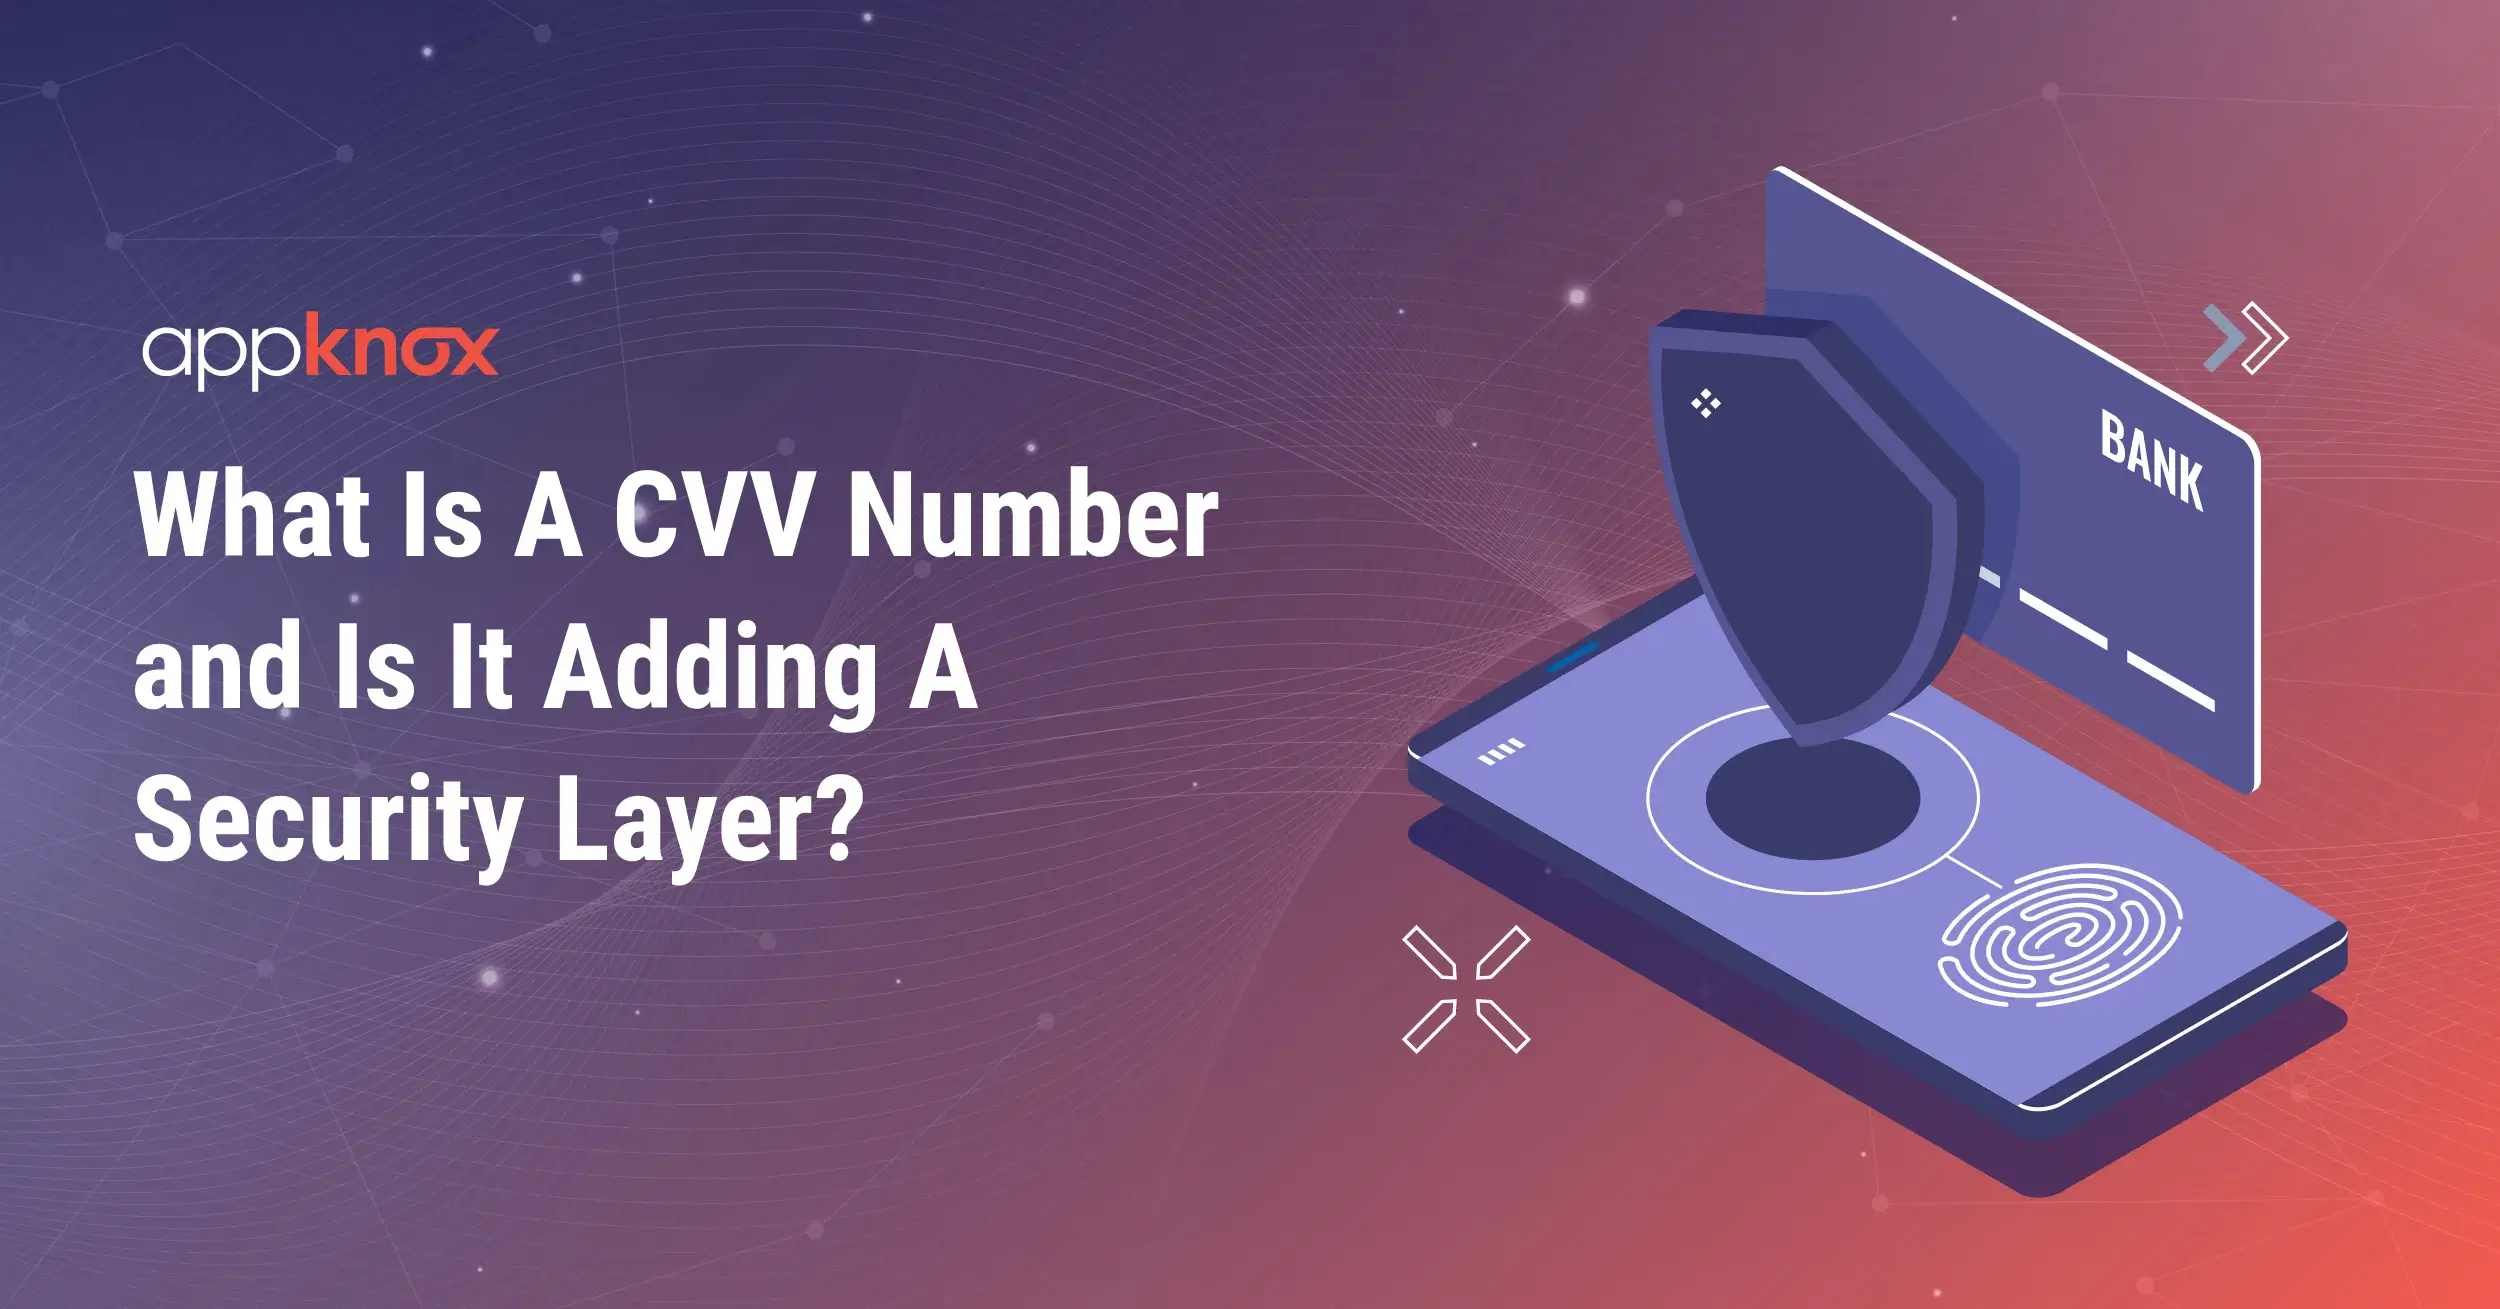 What is a CVV Number and is it adding a security layer?